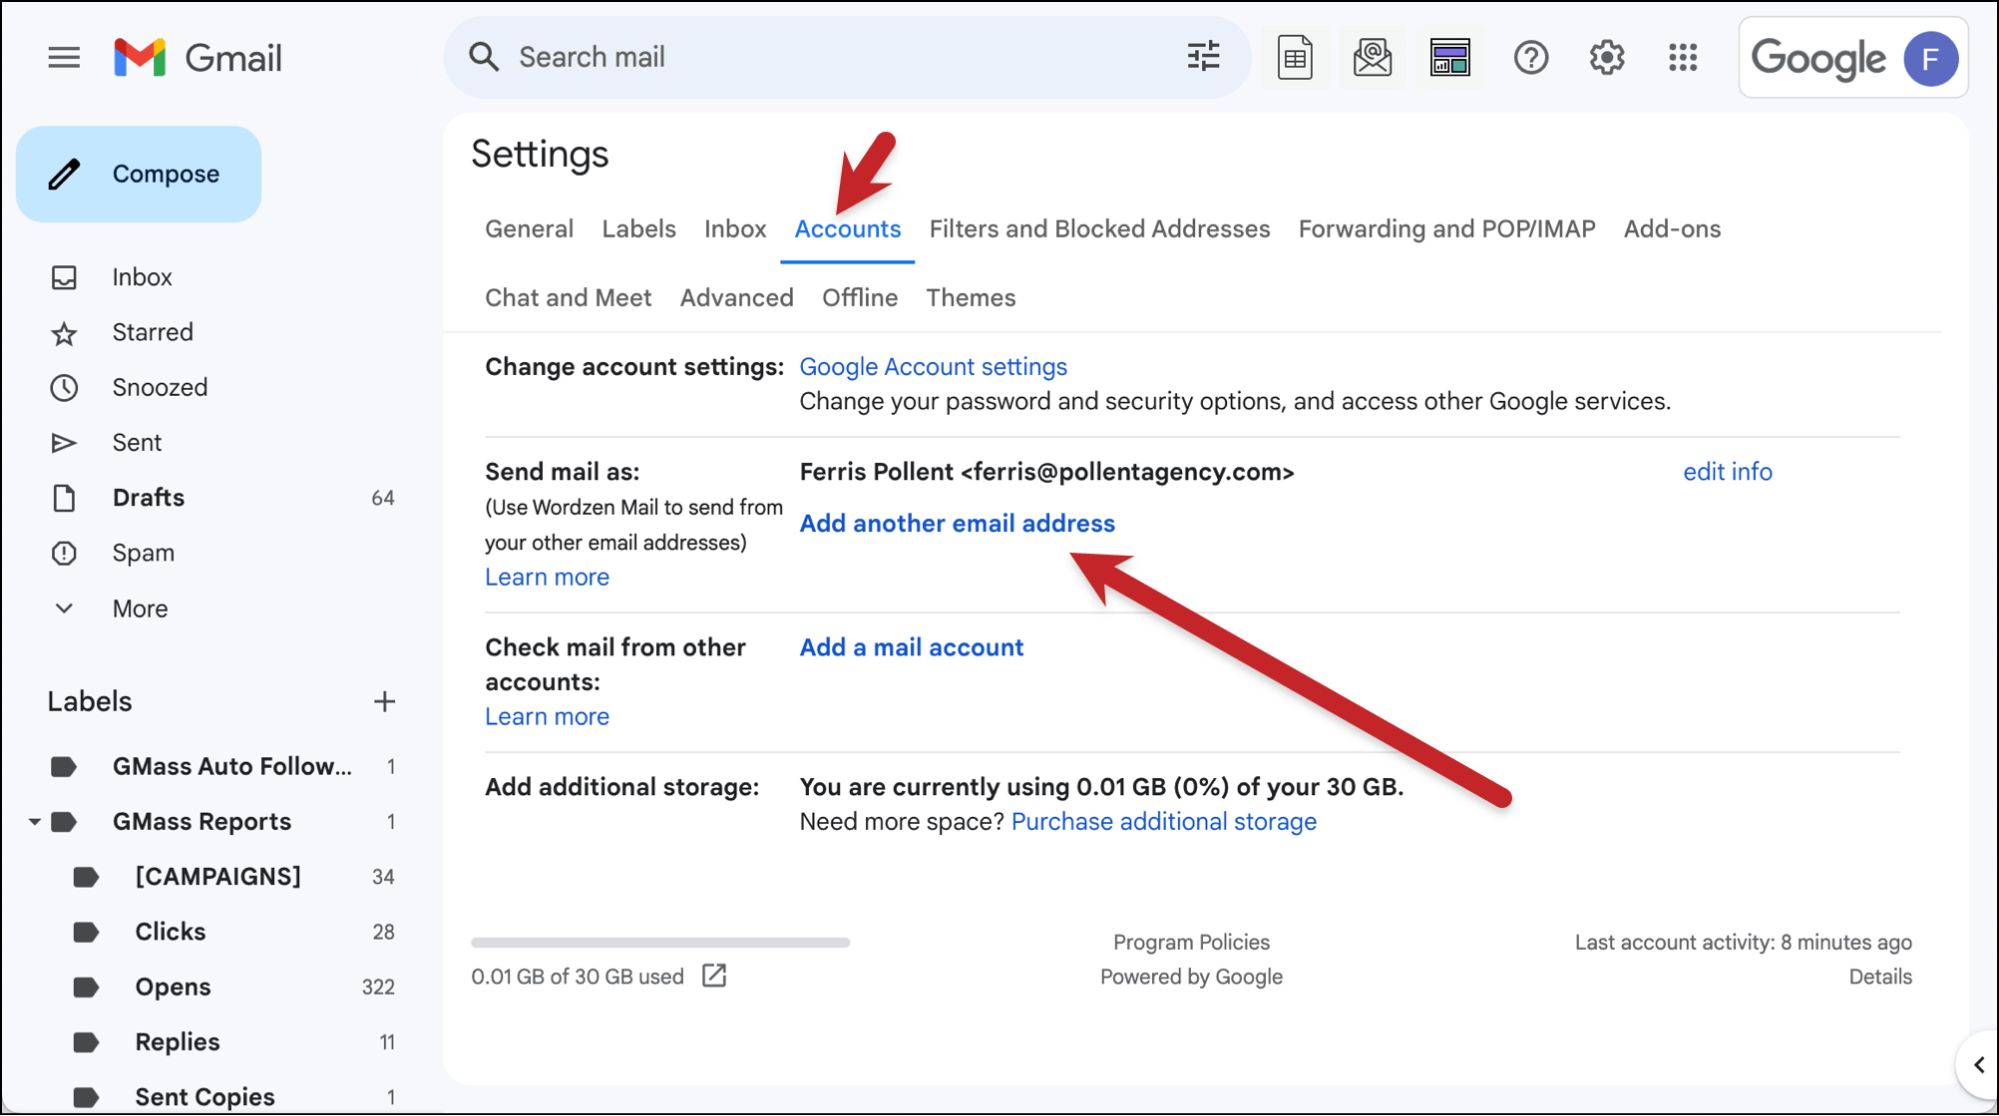 Now add another email address in Gmail